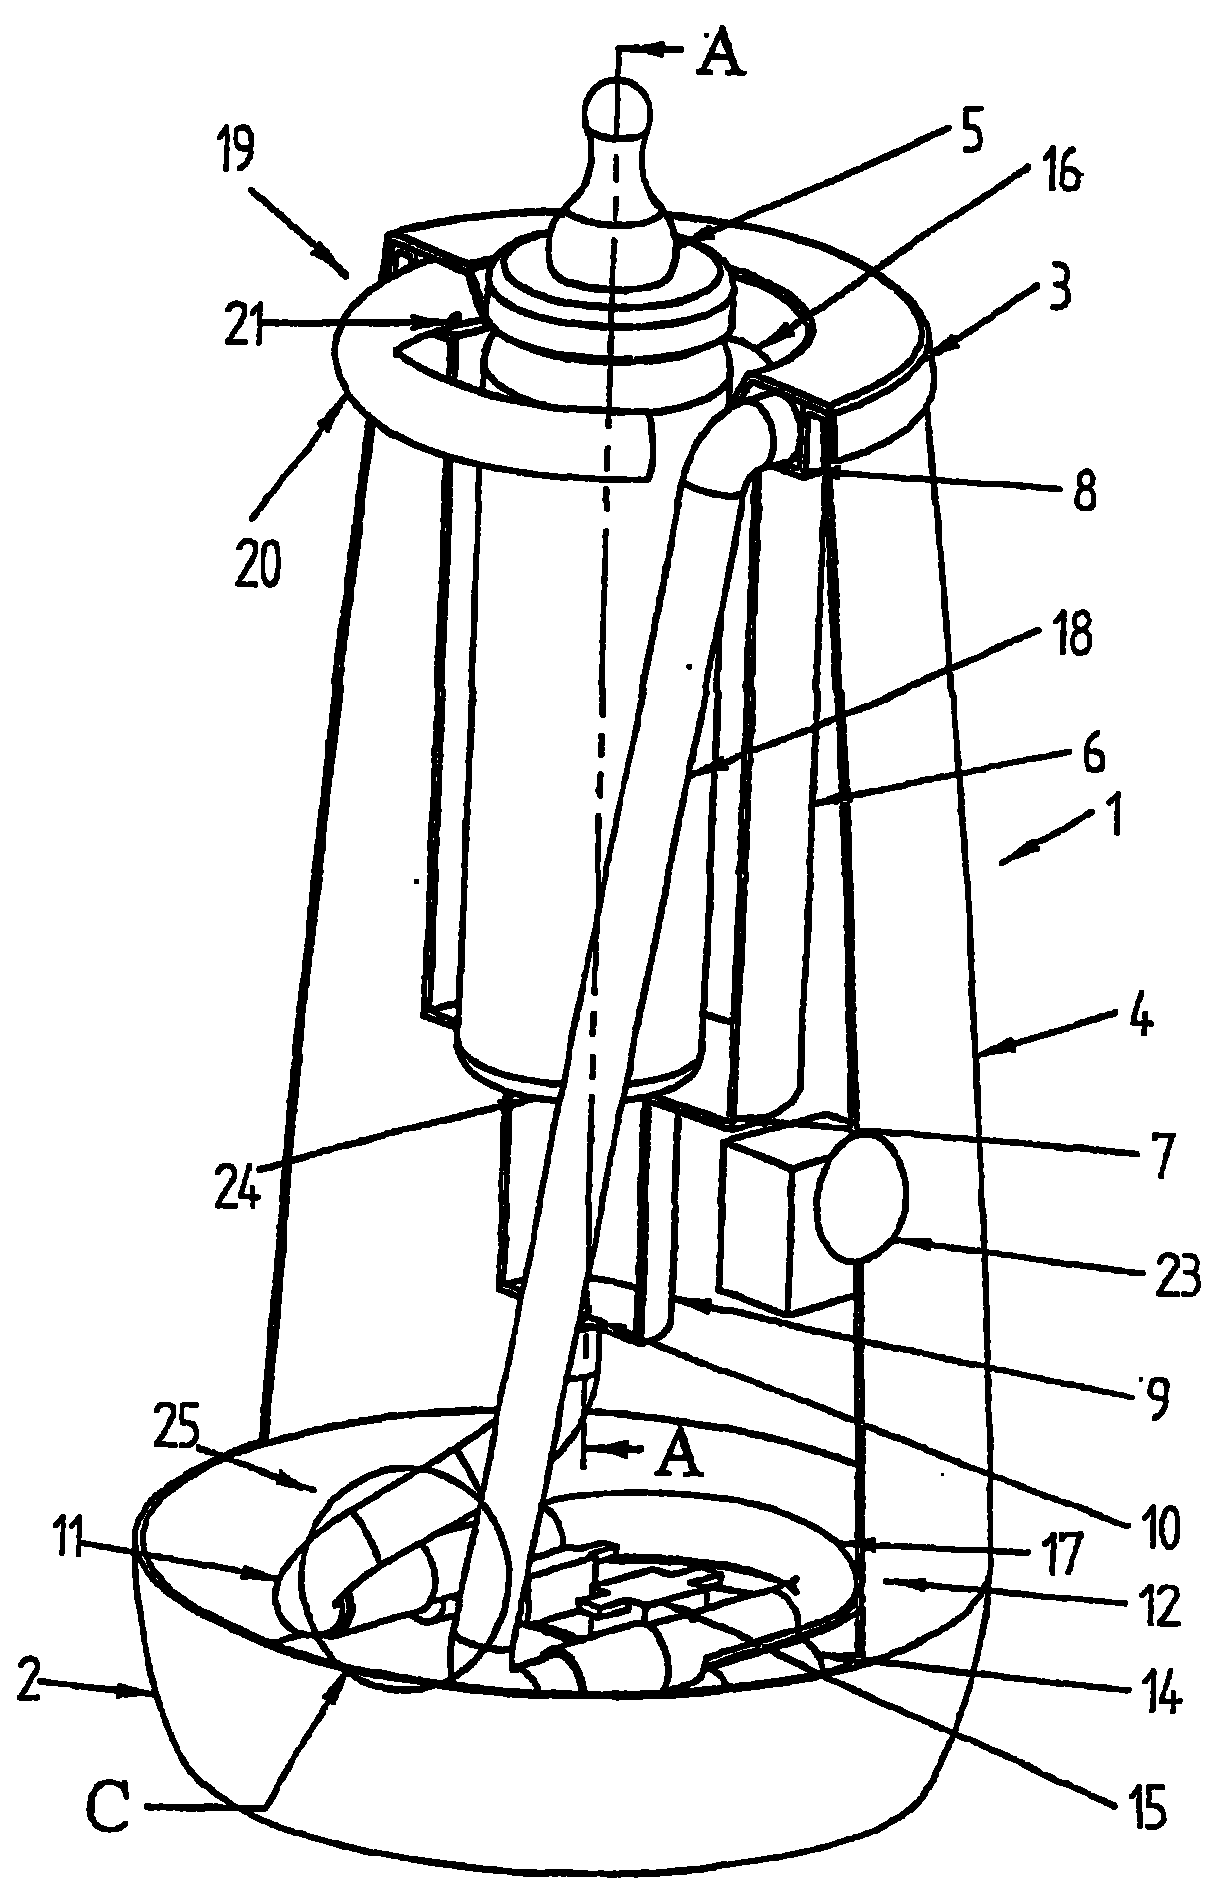 Apparatus for heating a vessel containing foodstuffs